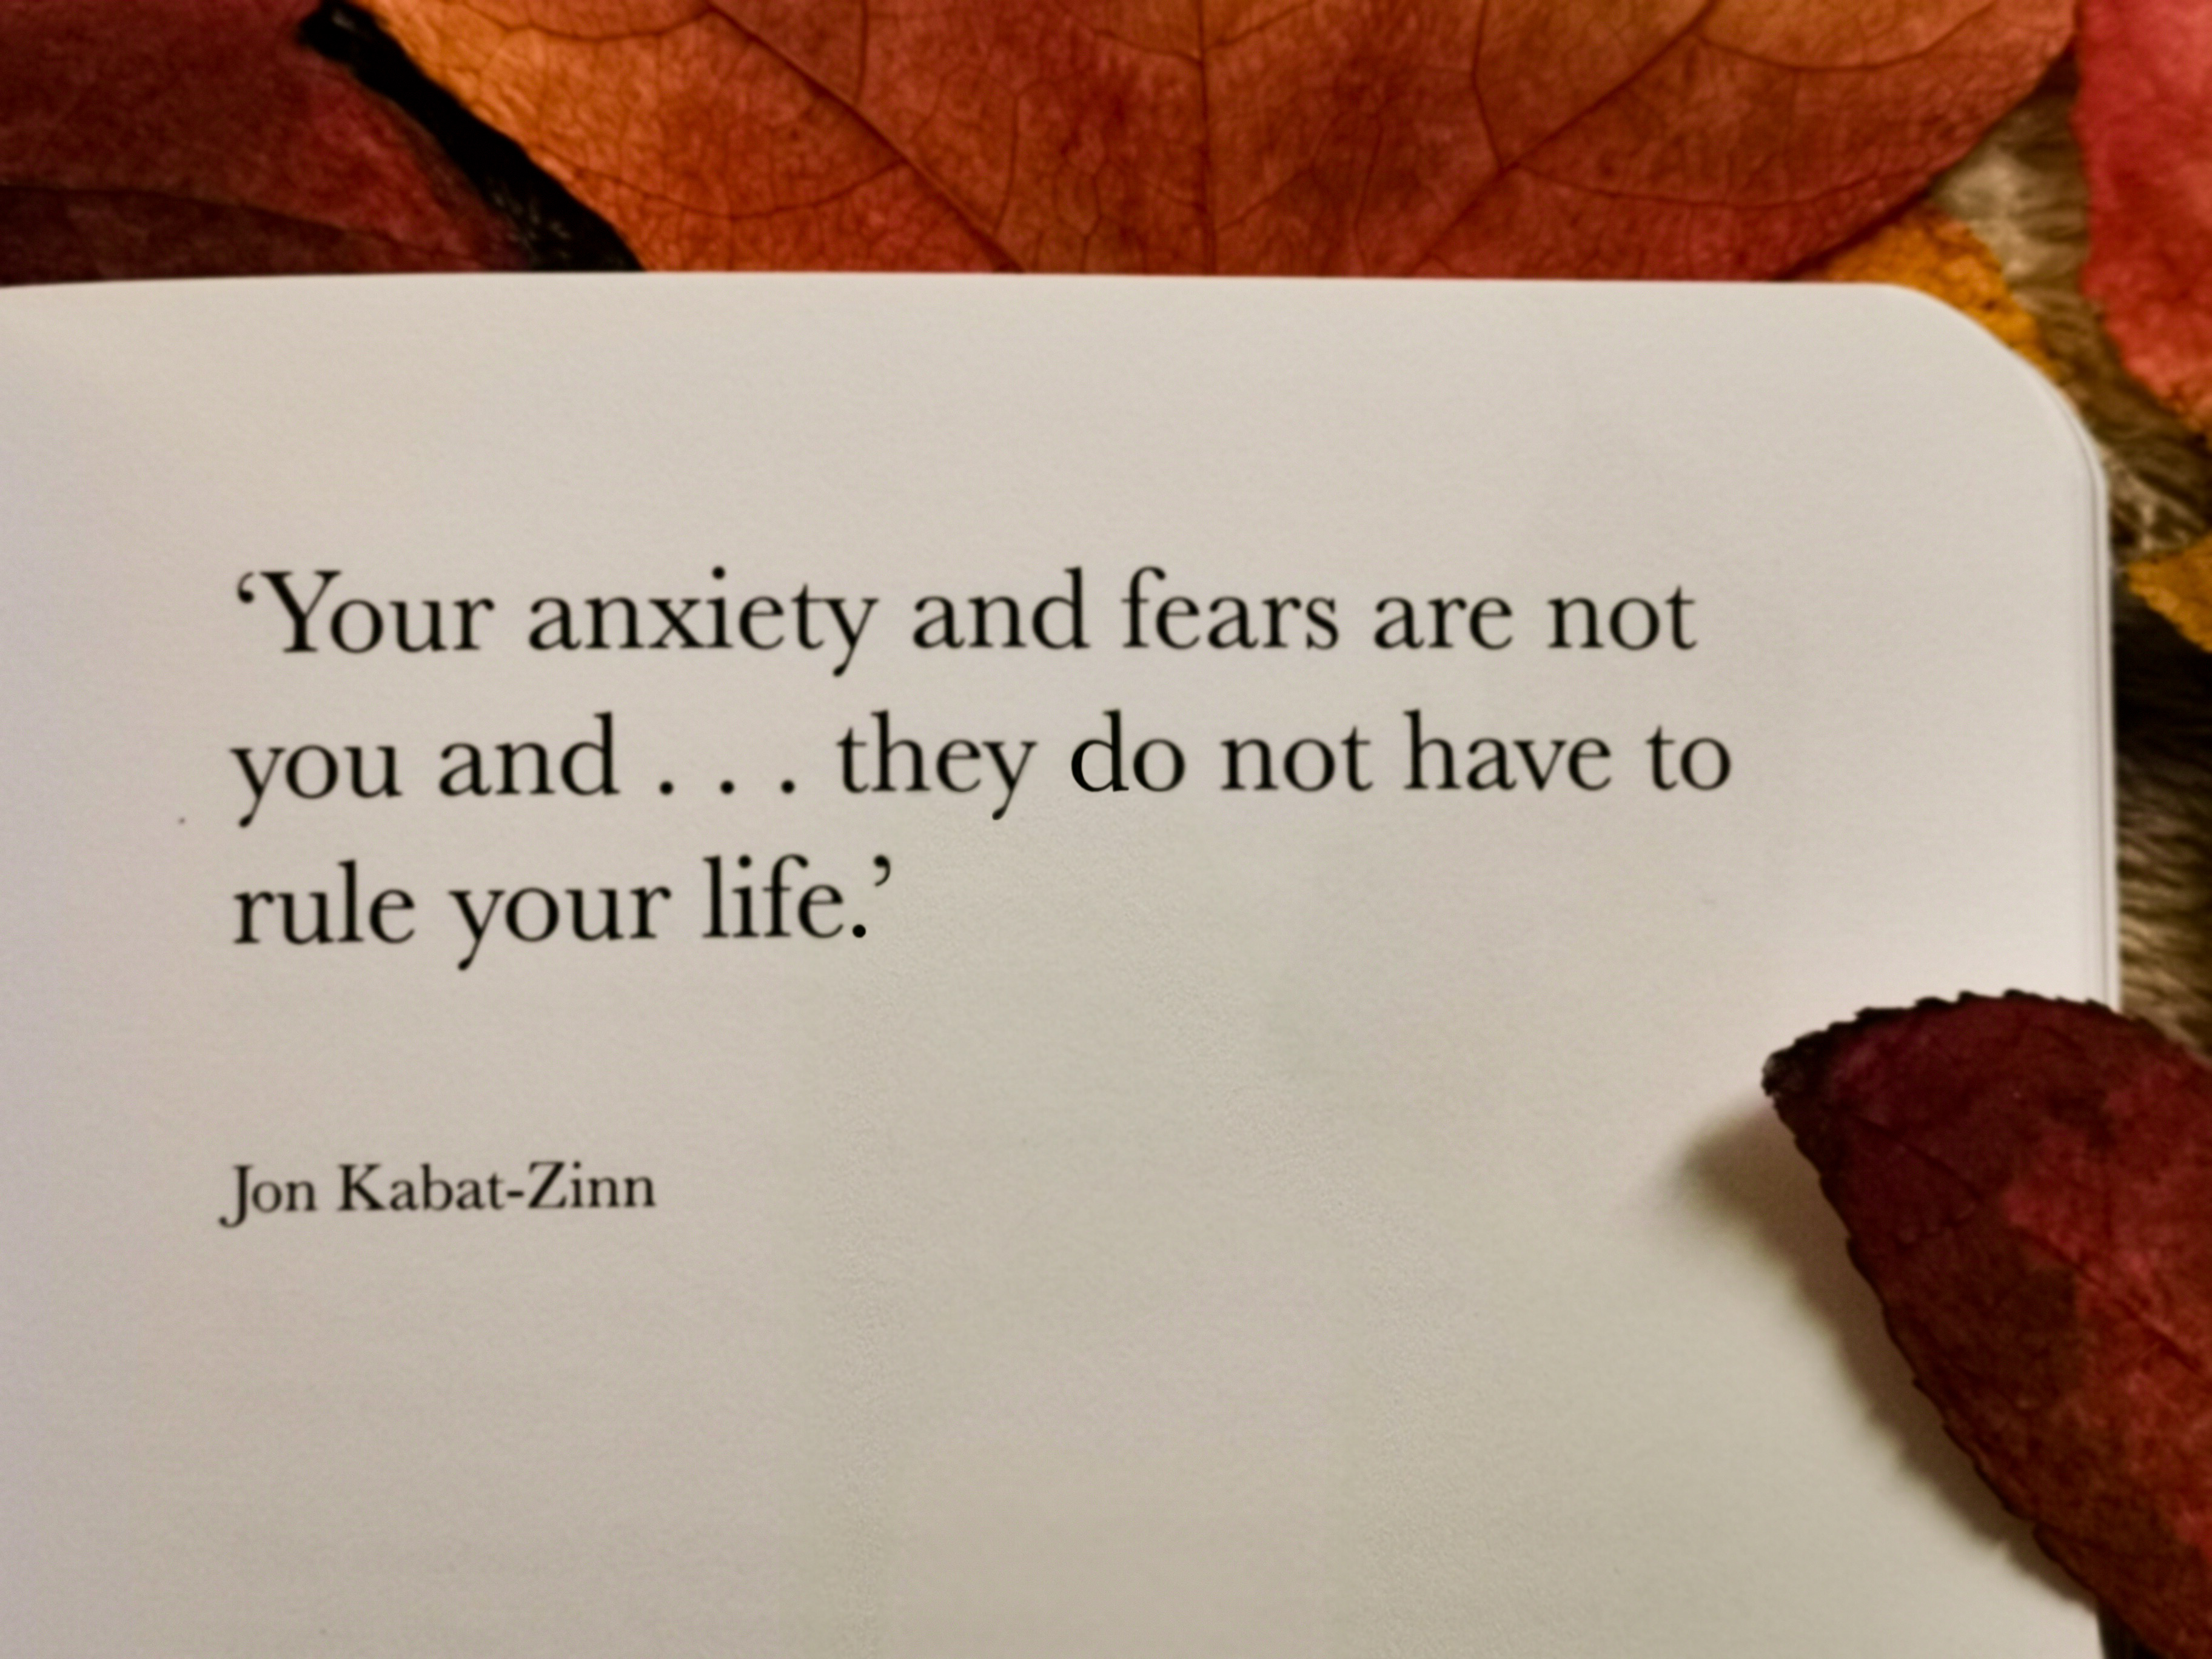 Corinne Sweet, the Anxiety Journal, Anxiety, Anxiety sufferer, mental health, book review, self help, self-help book, self-help, book viewer, blogger, book blogger, lifestyle blogger, Blogtober, October